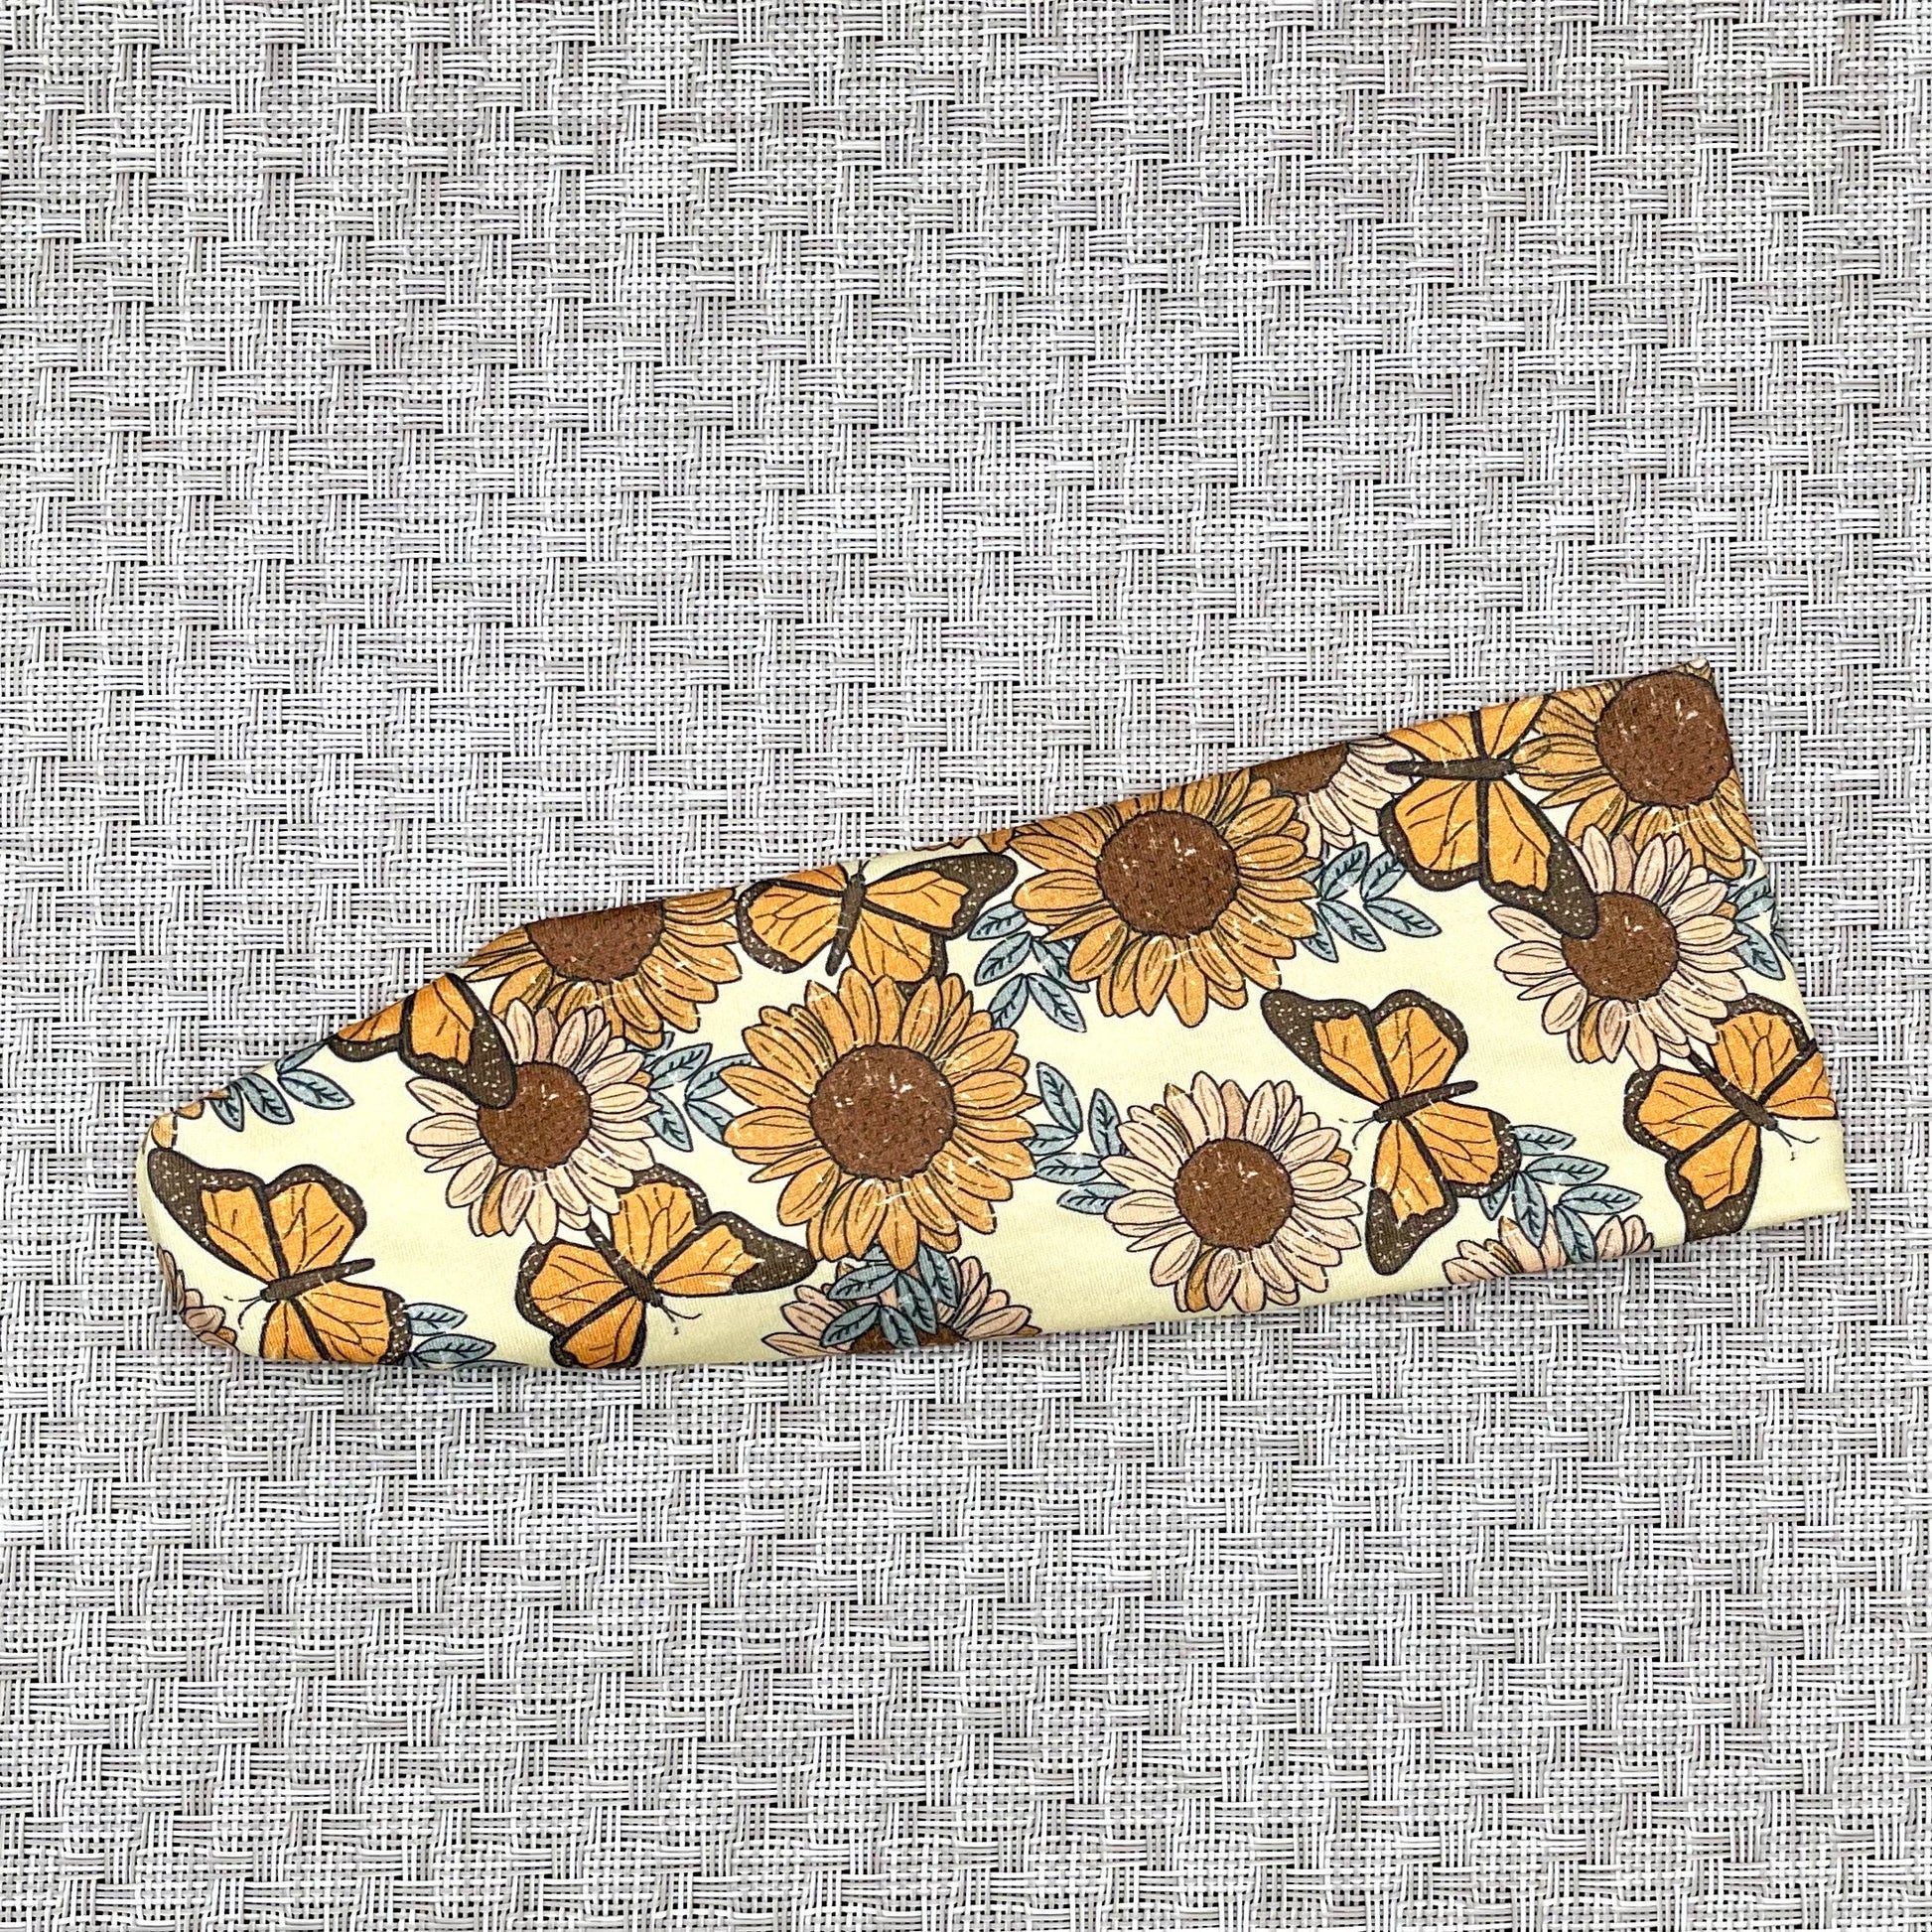 yelllow/tan headband with sunflowers and monarch butterflies